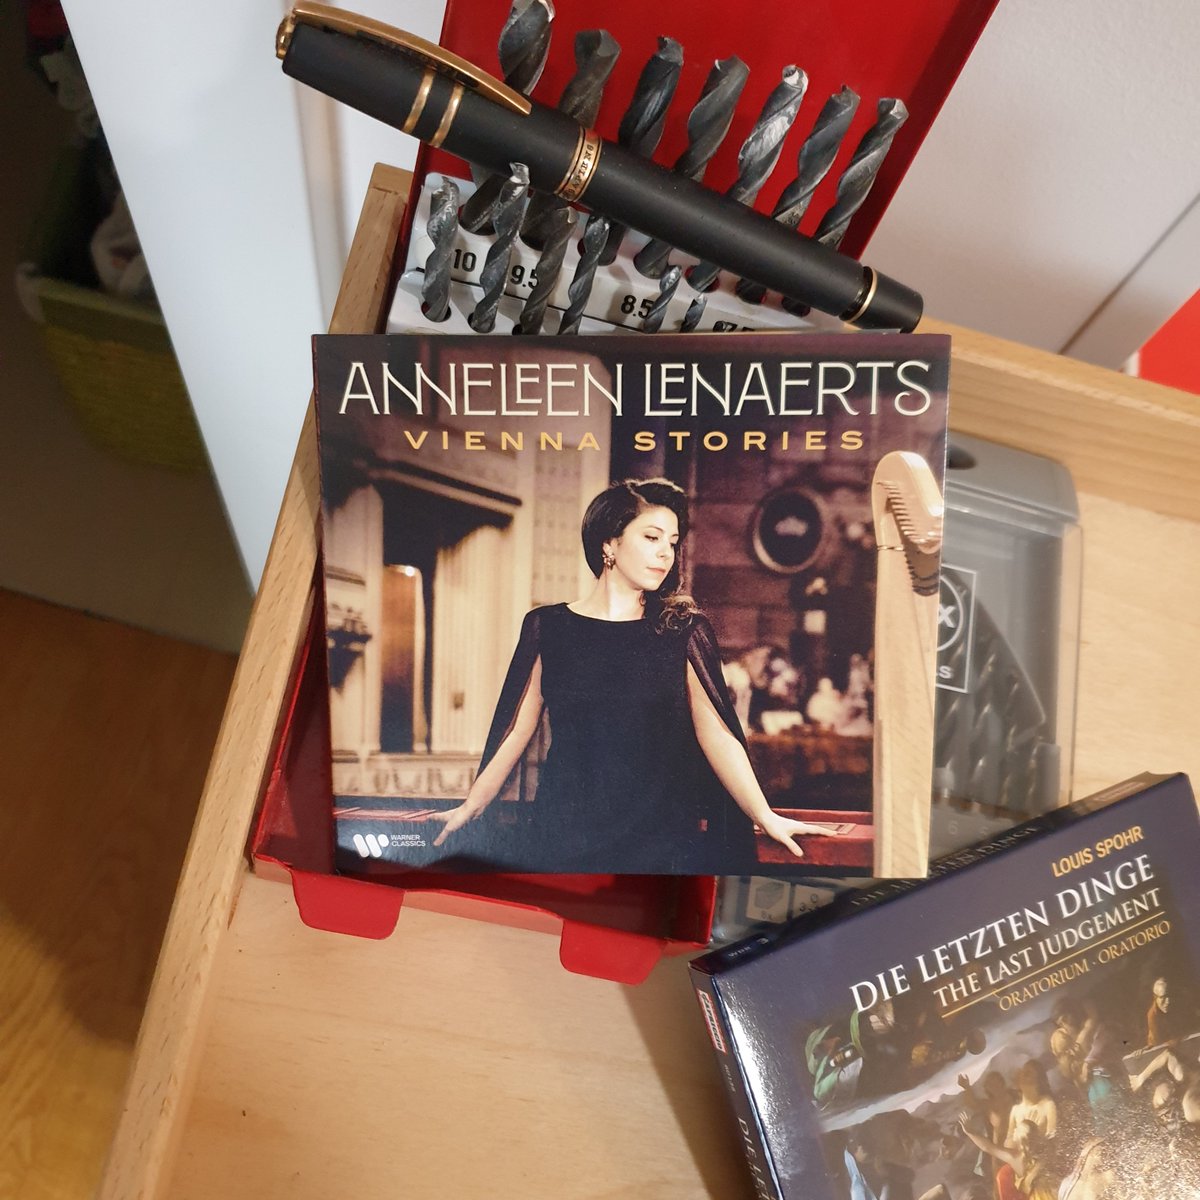 #morninglistening to ViennaStories: what happens when harpists play lots of opera but want the tunes for themselves. 😇 Gorgeous 🎶 from an Echt-musician, not a harp-athlete. Will convert skeptics! From Wagner to Dvořák et al: a box of chocolates. Amazon: amzn.to/45bGZ2g